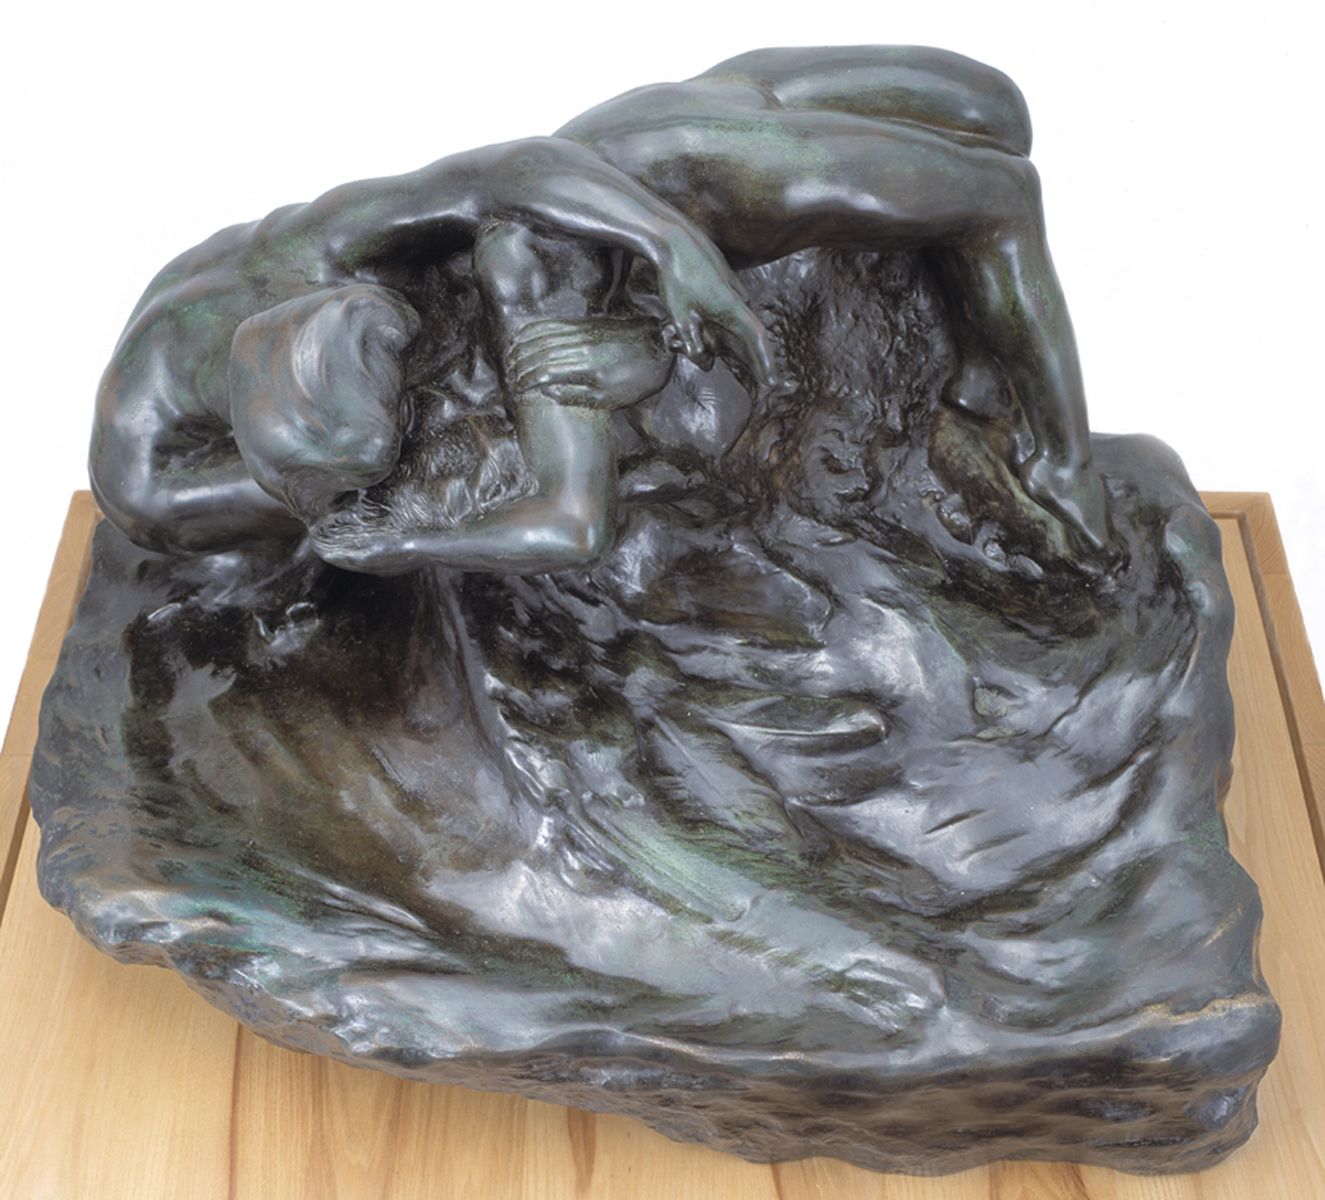 A bronze sculpture by Rodin showing two human figures twisting and contorting in a vague, cloud-like shape